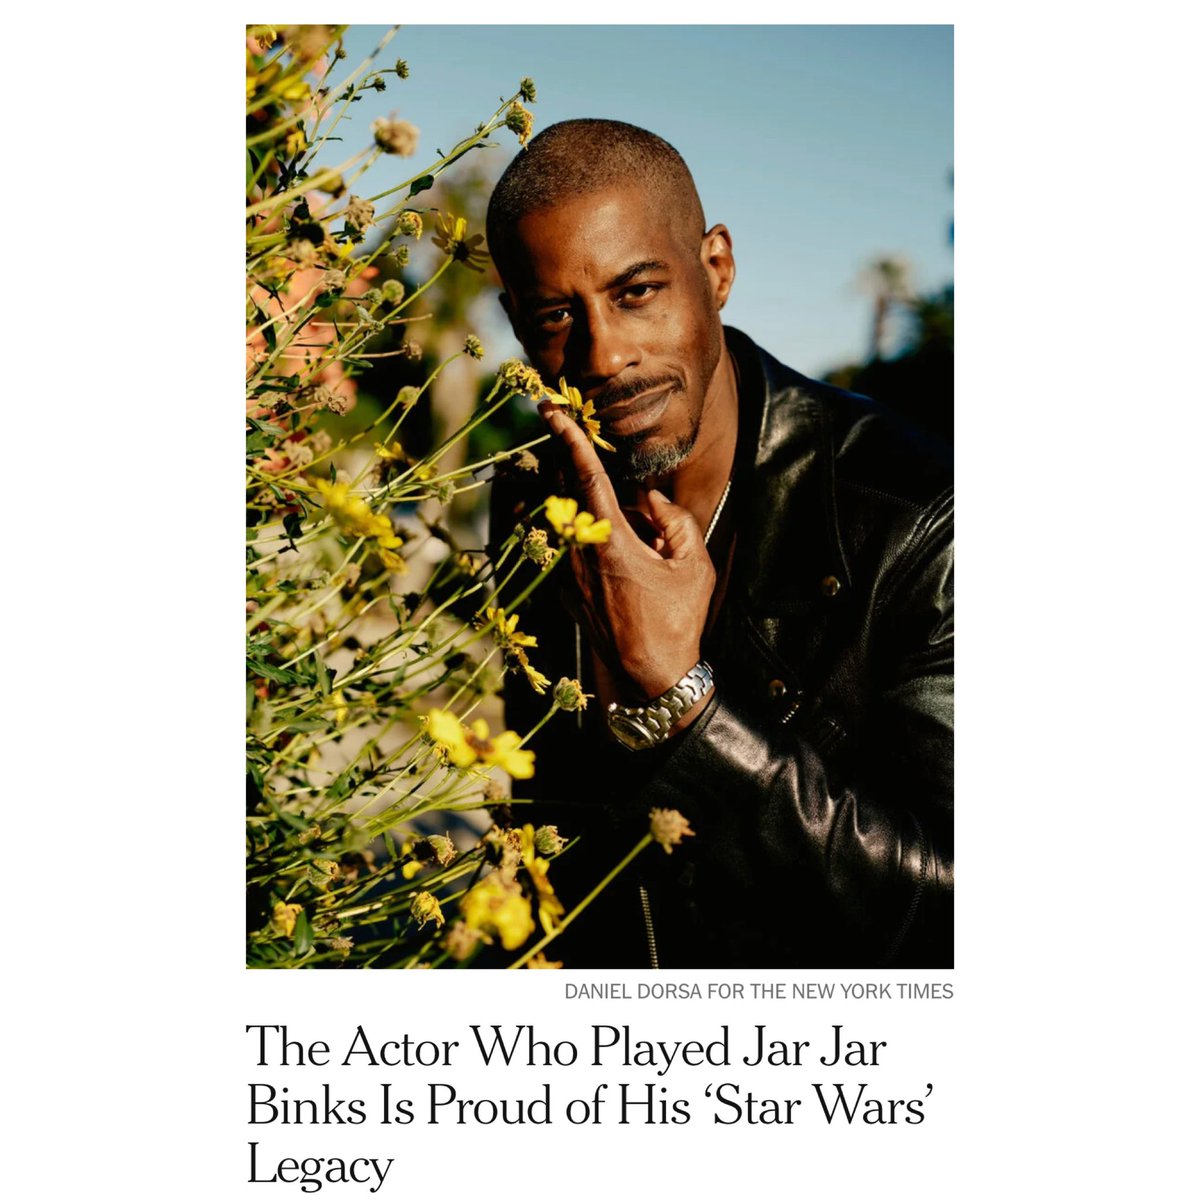 I recently met Ahmed Best, the multi-hyphenated performer who played Jar Jar Binks in the STAR WARS prequels. I profiled him for New York Times on the occasion of the 25th anniversary re-release of THE PHANTOM MENCE. I’m very proud of this piece: tinyurl.com/32ecerxn